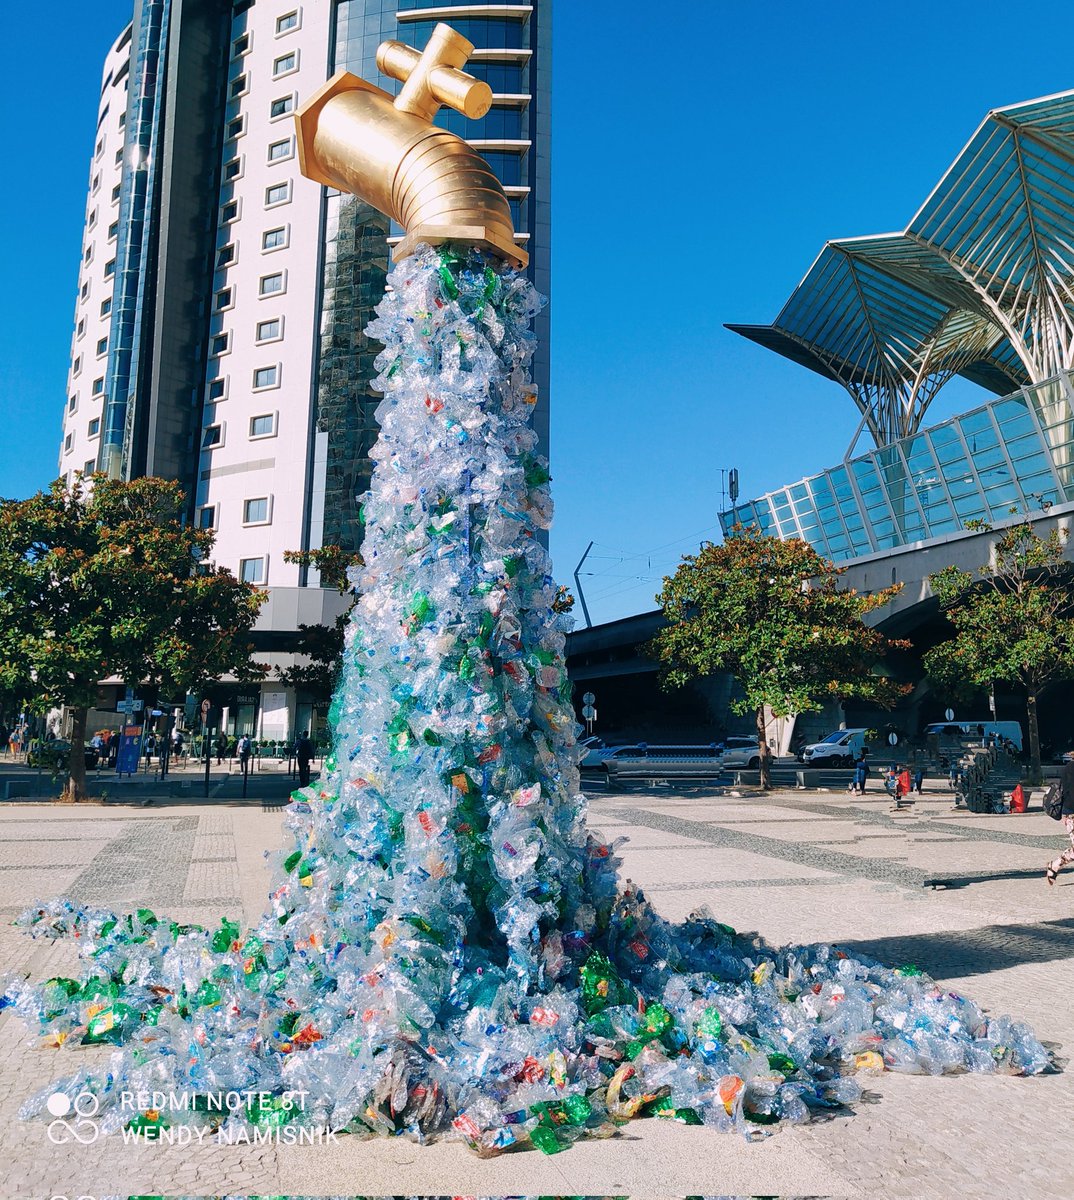 #EUMissions Restore our Ocean & Waters aims to reduce #plasticpollution at sea🌊, a concept 💯 illustrated in this piece by @thevonwong outside the #UNOceanConference2022 in Lisbon.  #TurnOffThePlasticTap #HorizonEU #MissionOcean #MissionOceanWaters #PREP4BLUE